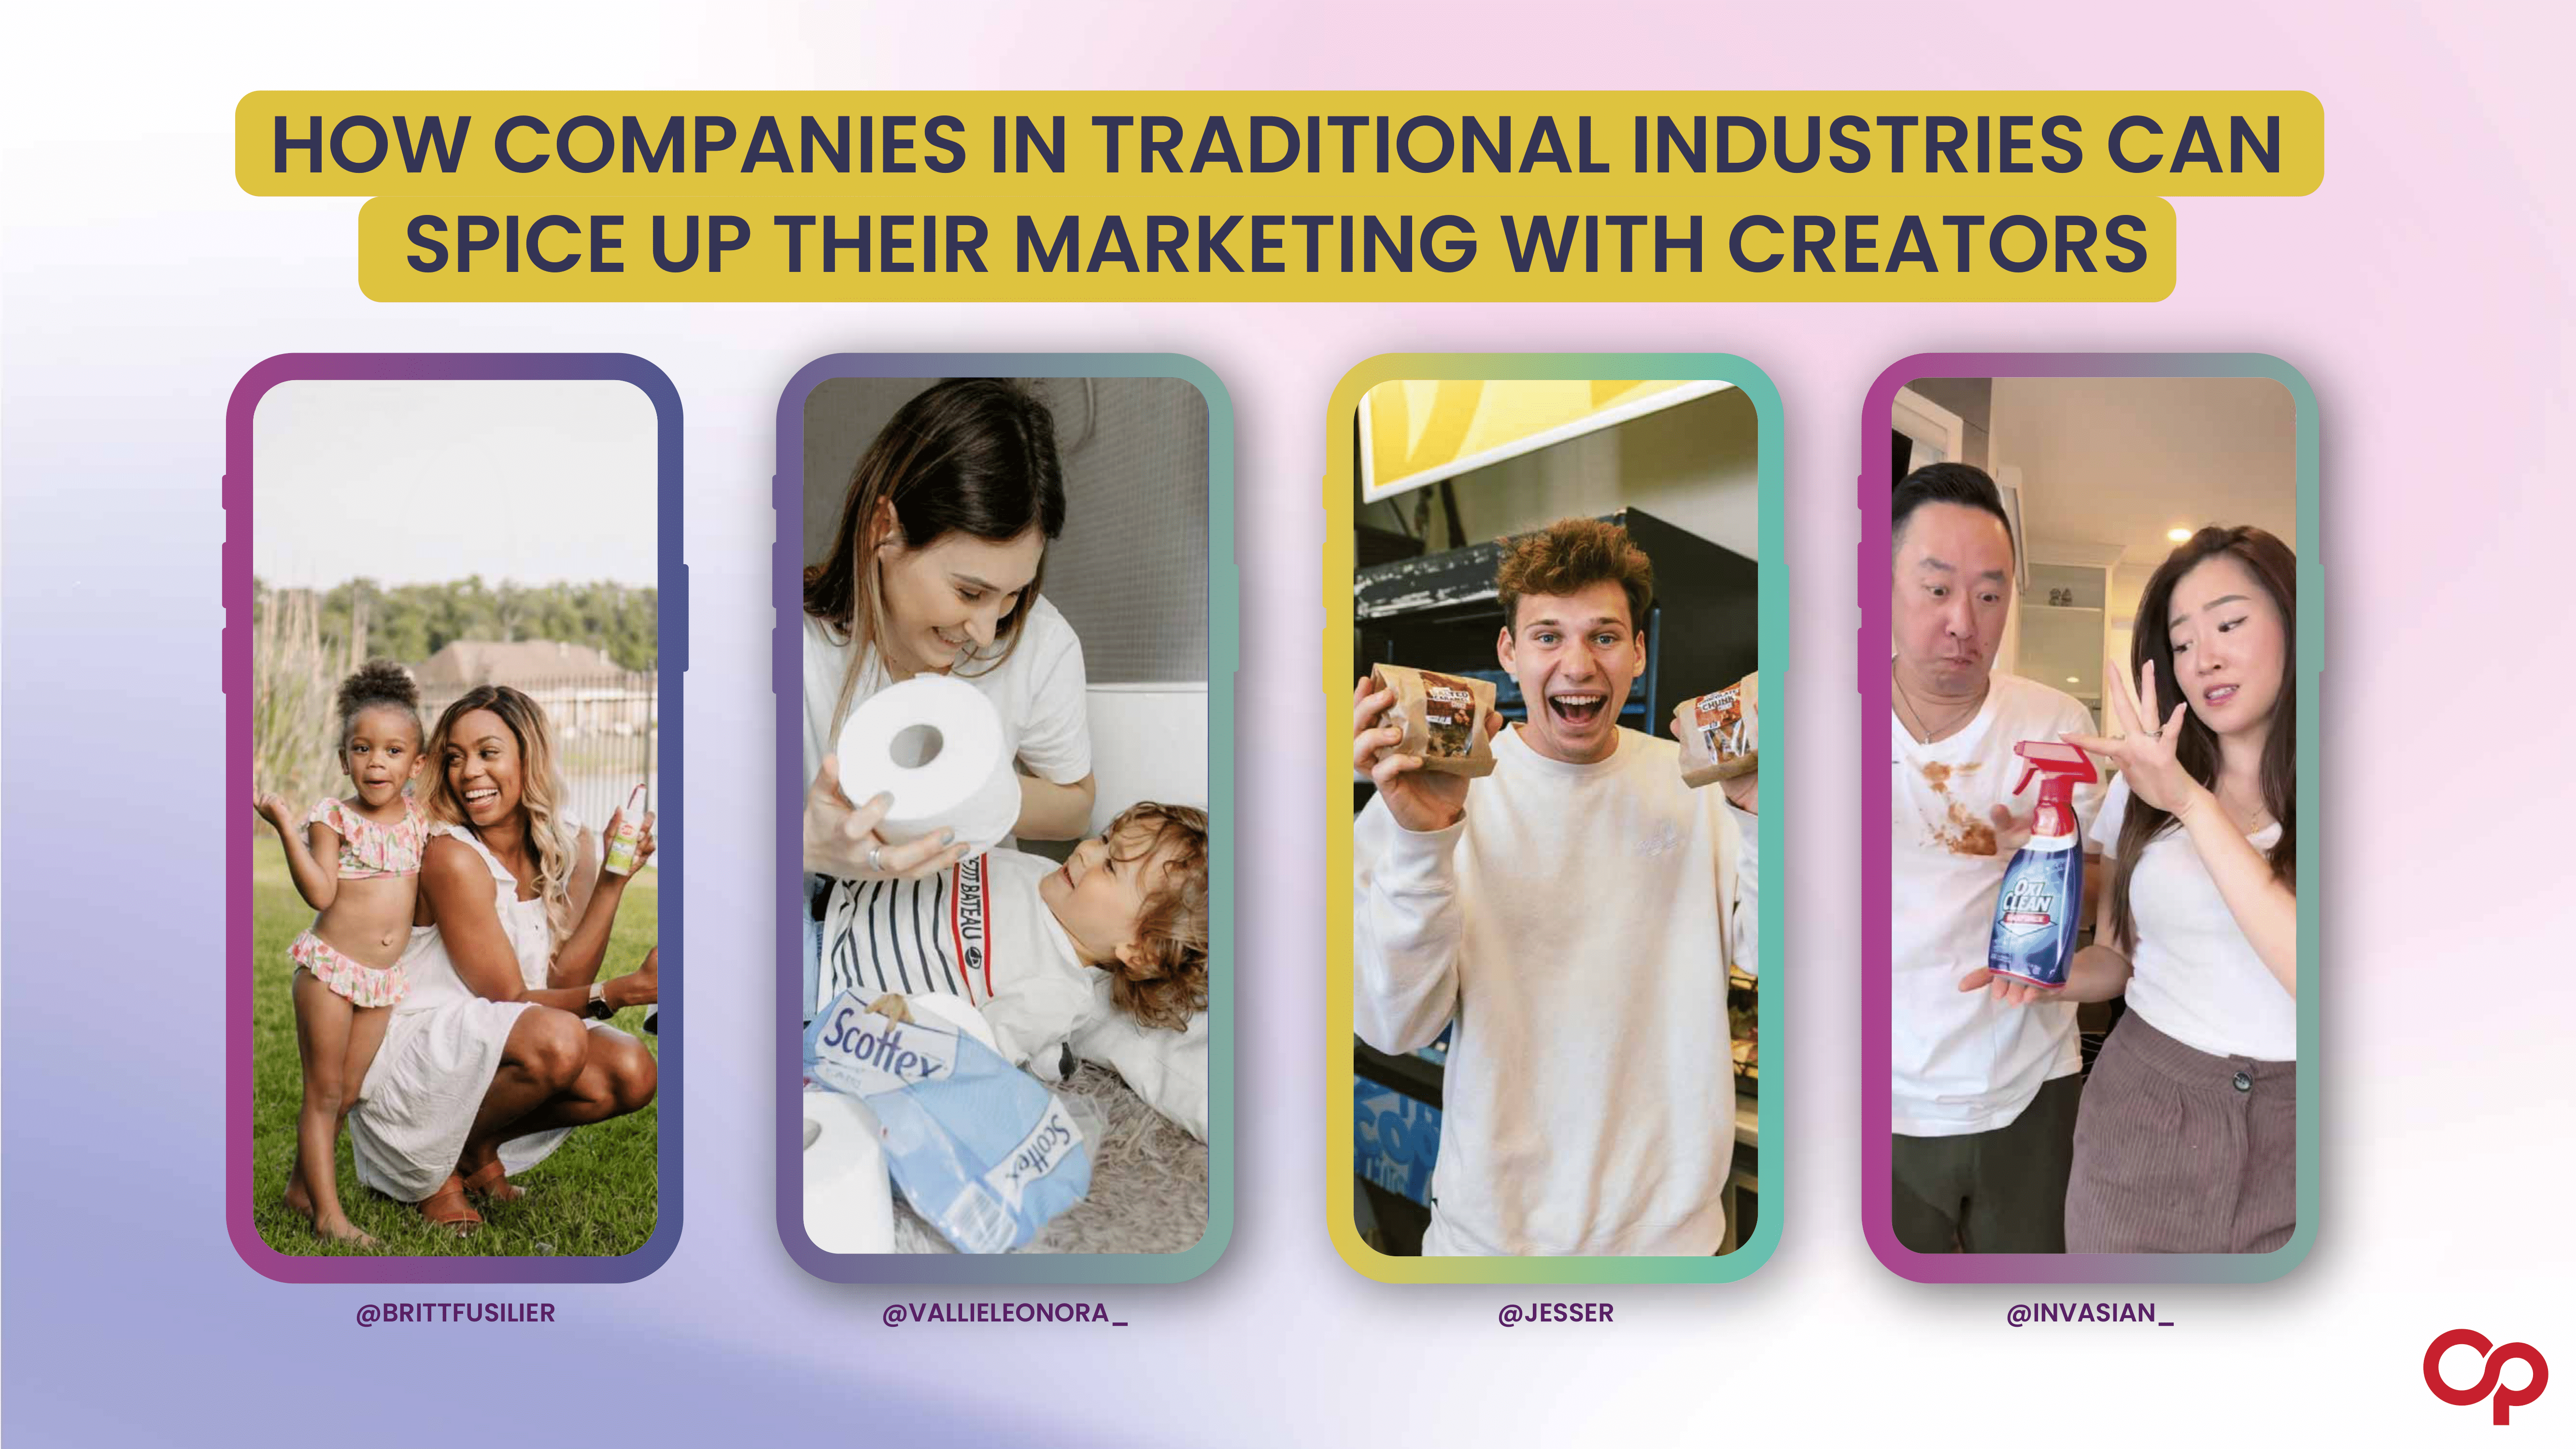 [REPORT] HOW TRADITIONAL BRANDS CAN SPICE UP THEIR MARKETING WITH CREATORS